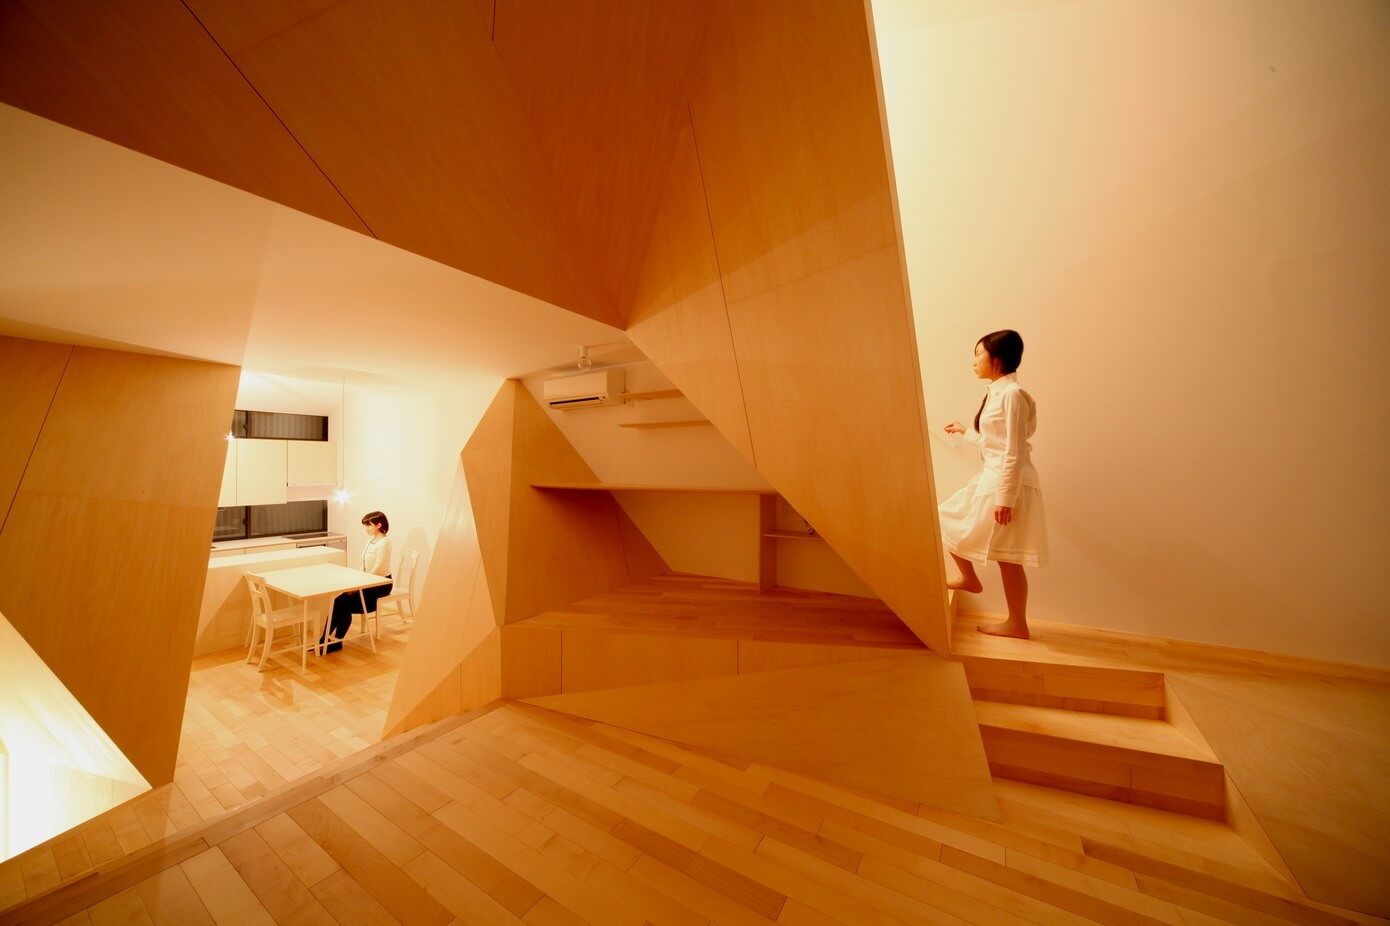 New Kyoto Town House by Alphaville Architects